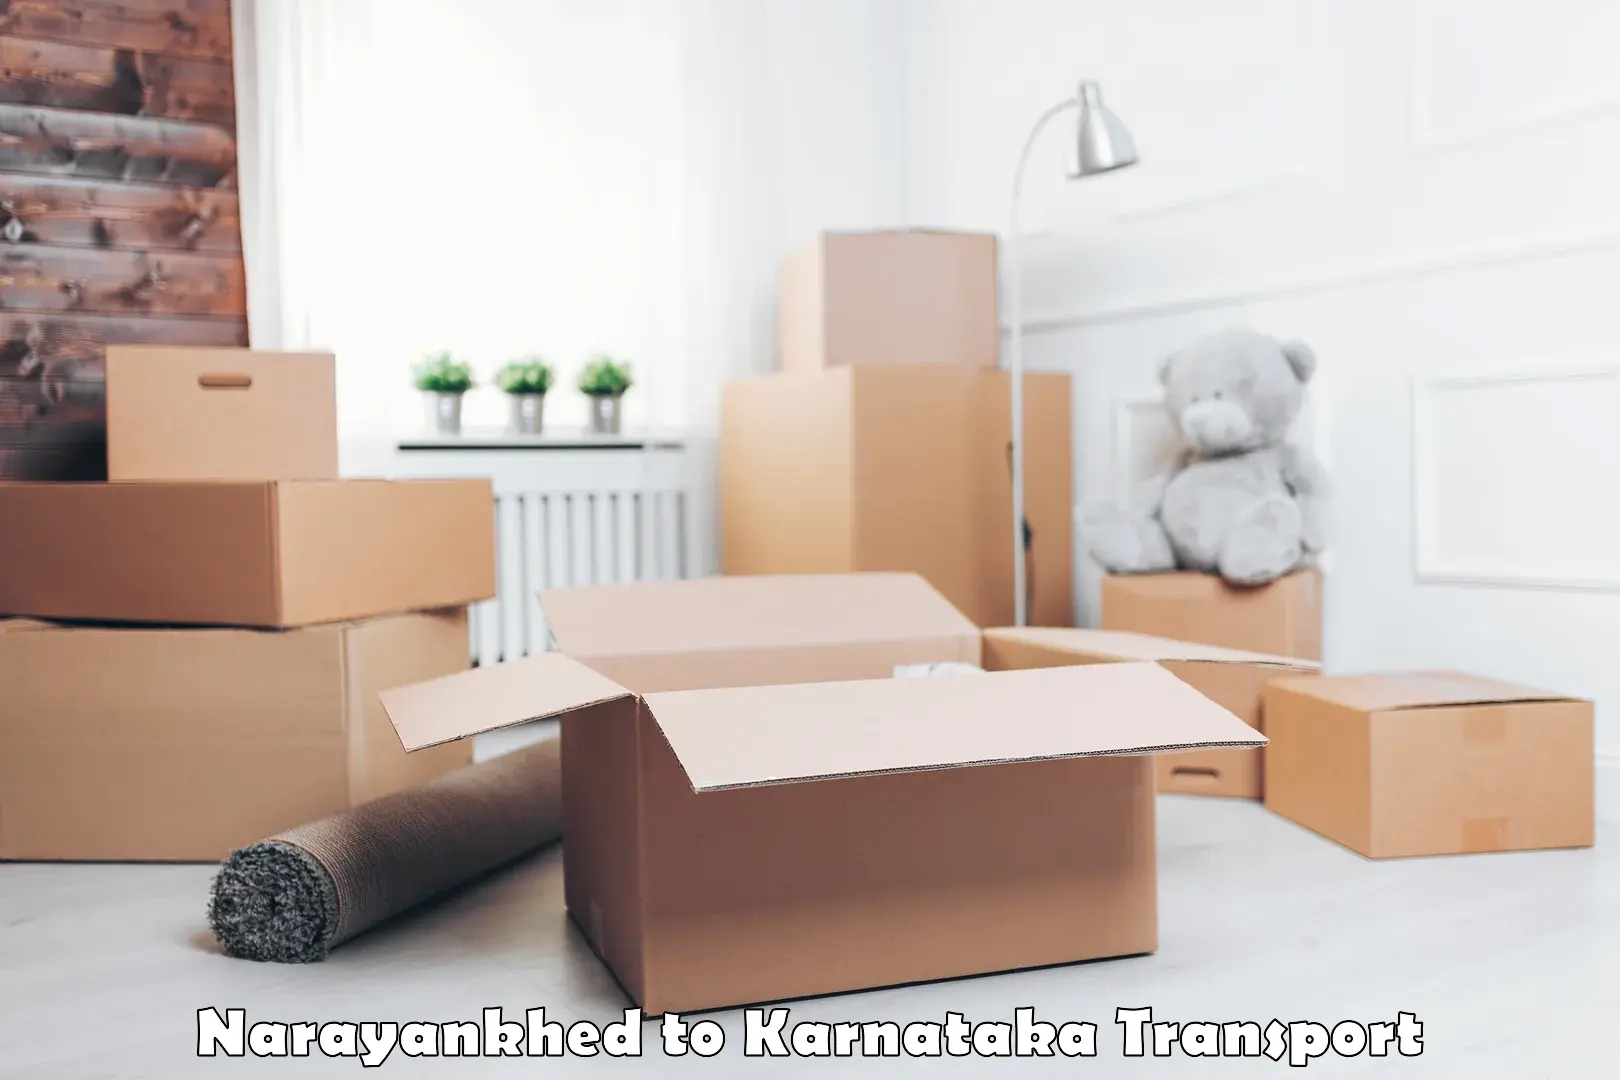 Transportation solution services Narayankhed to Yellapur